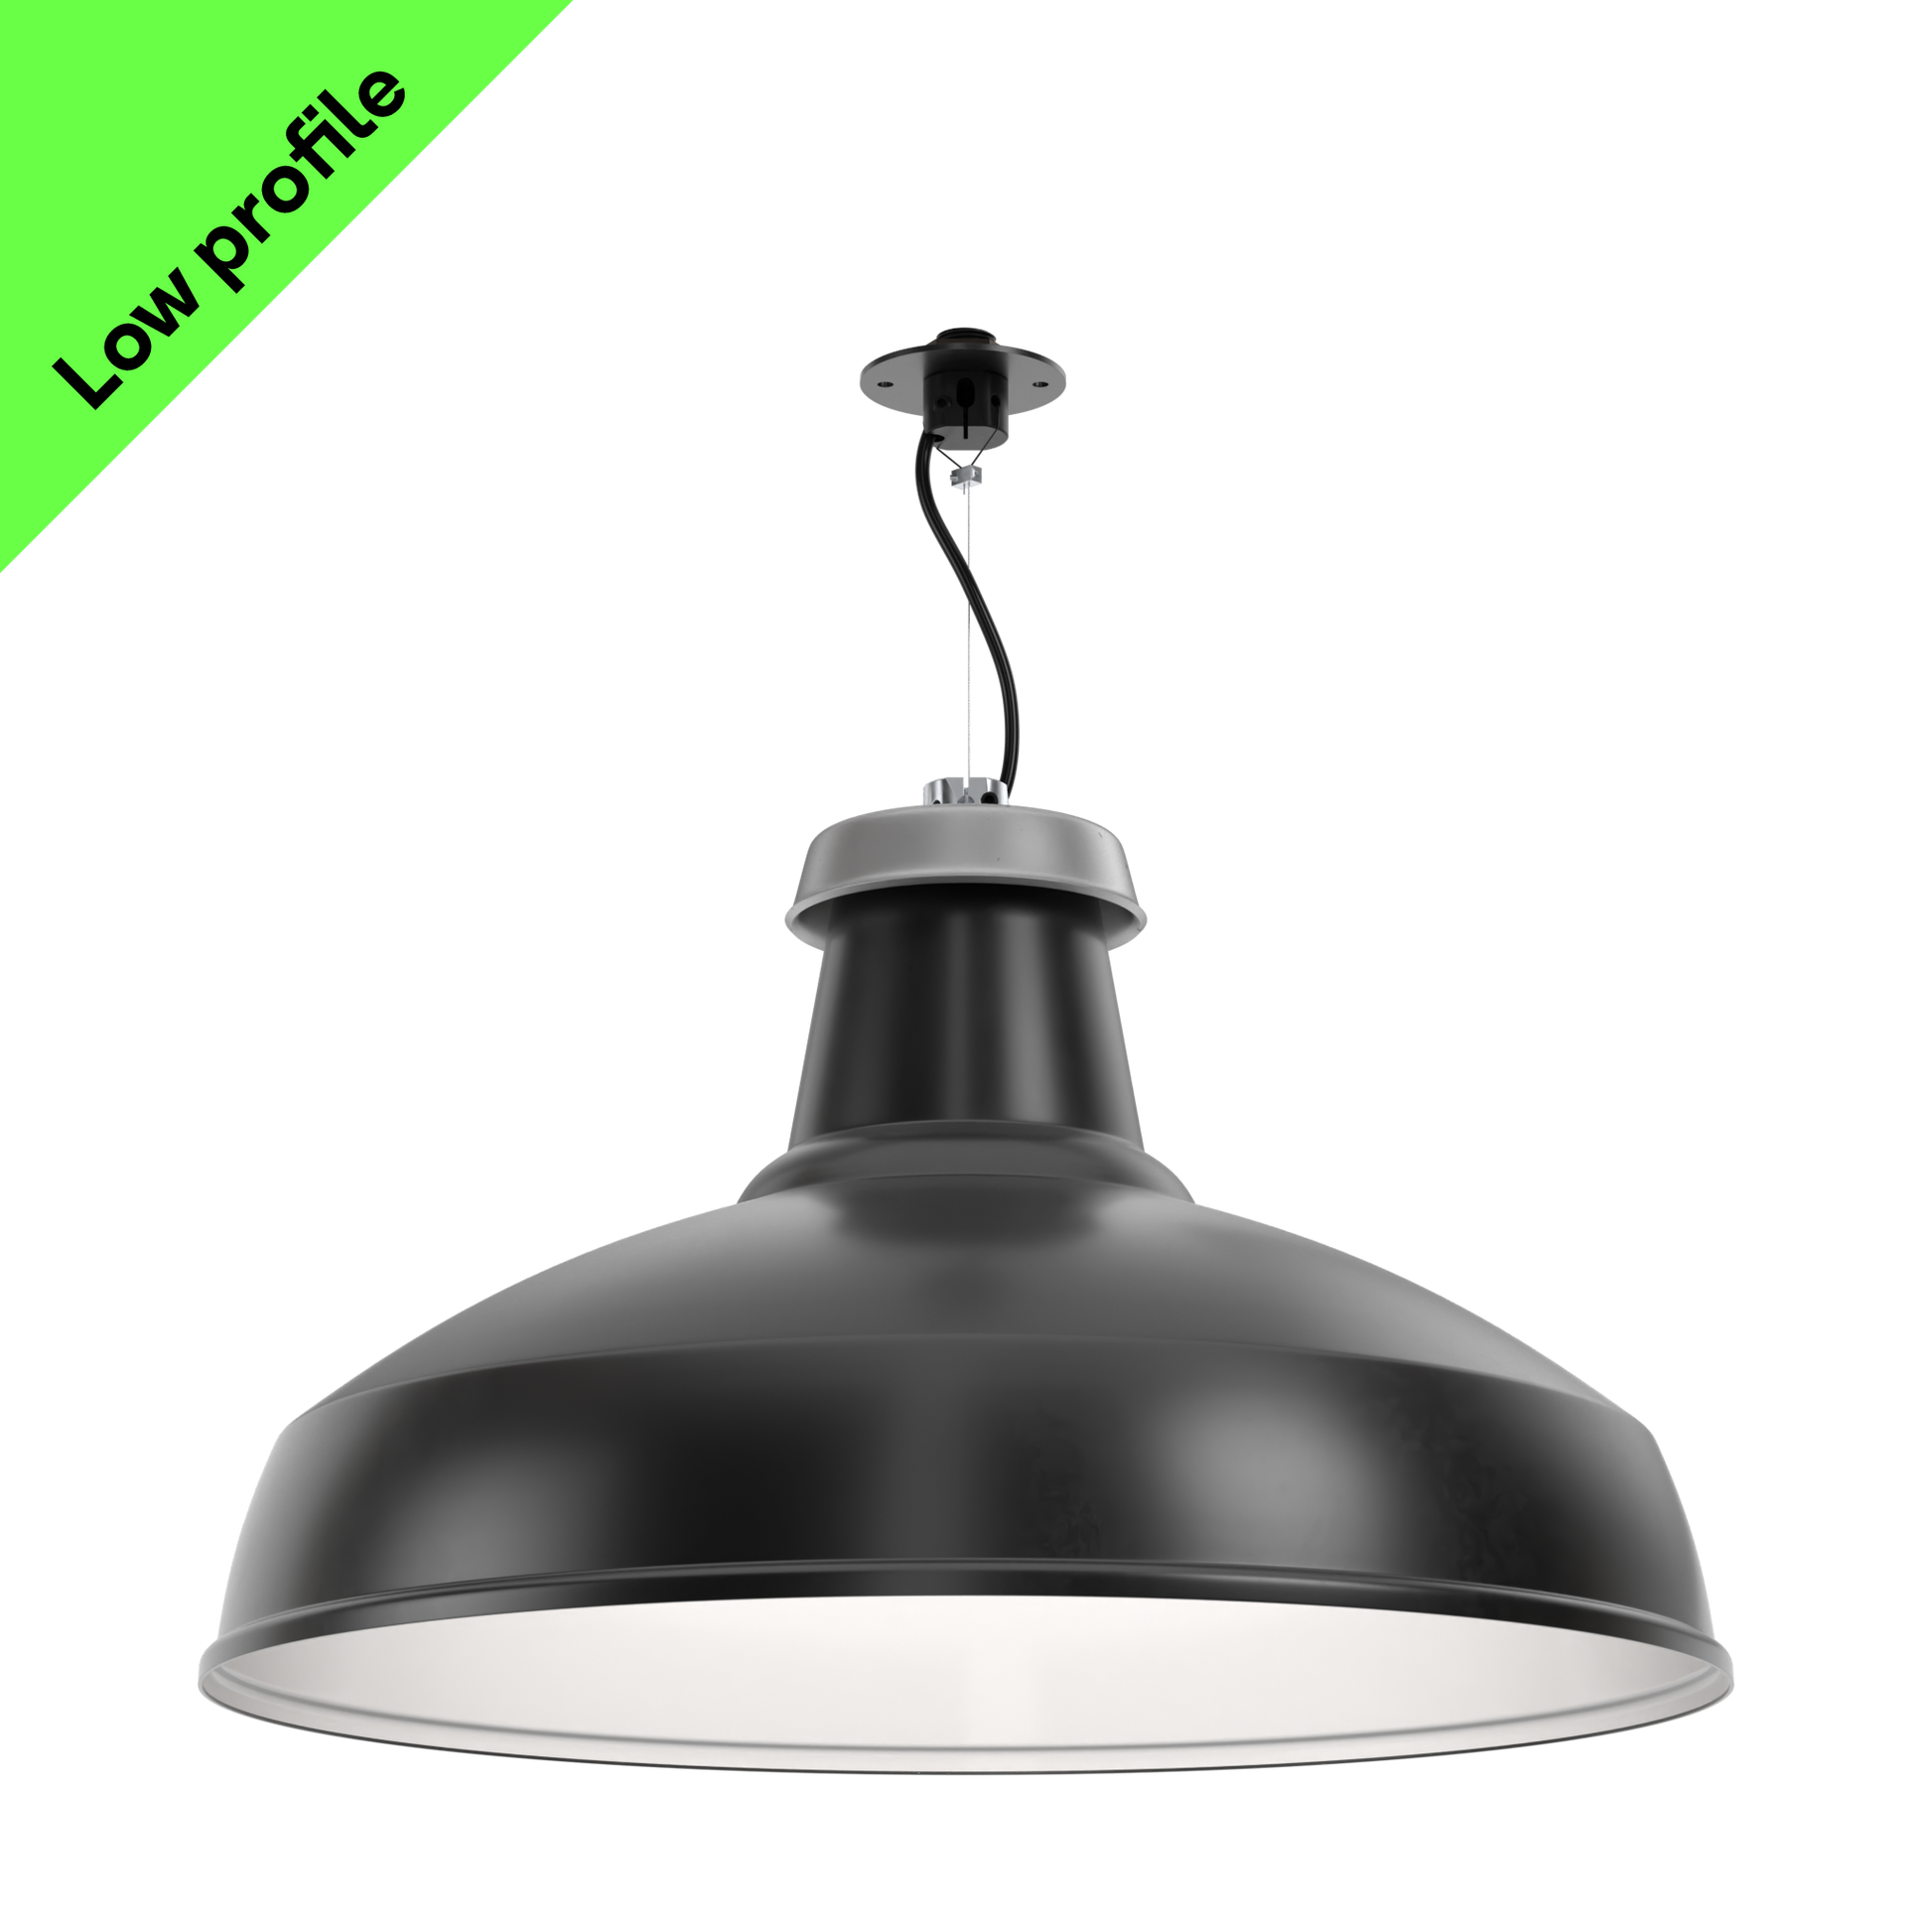 A sustainable architectural XL pendant light on a low-profile, flat mounting disc with BESA hole spacings